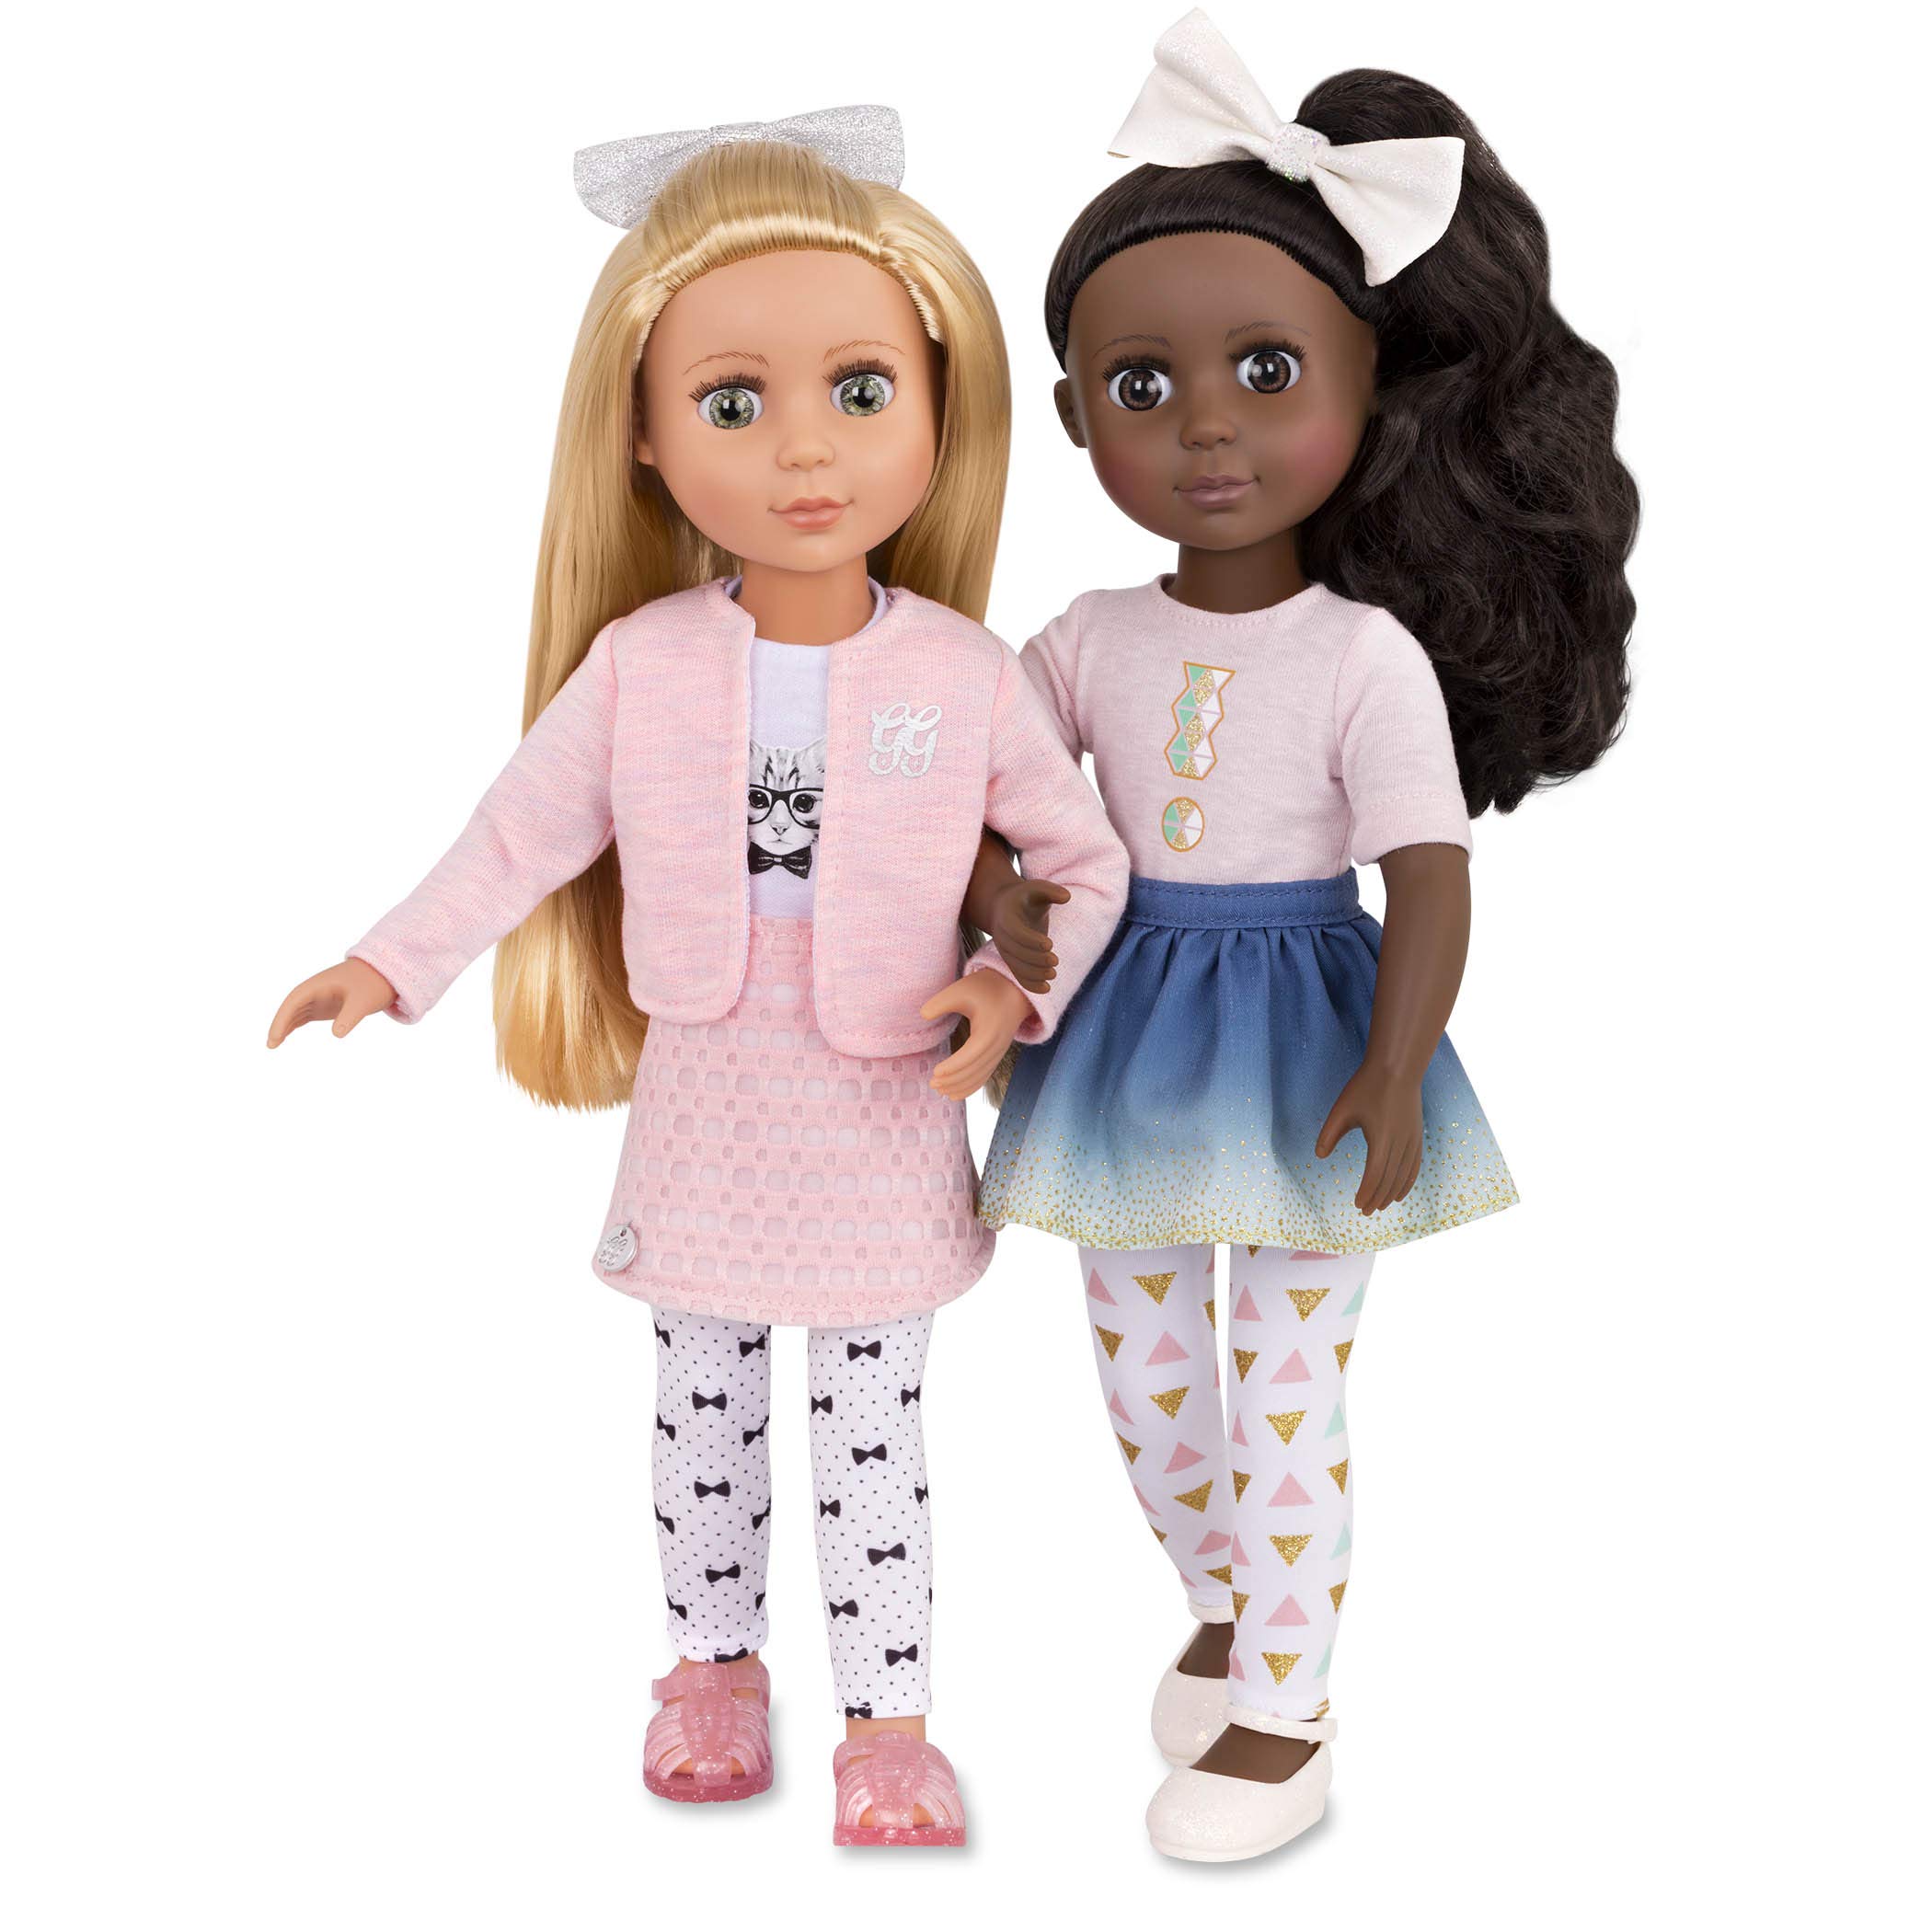 Glitter Girls Dolls Keltie Fashion Doll, 14-Inch Doll, Ages 3 and Up